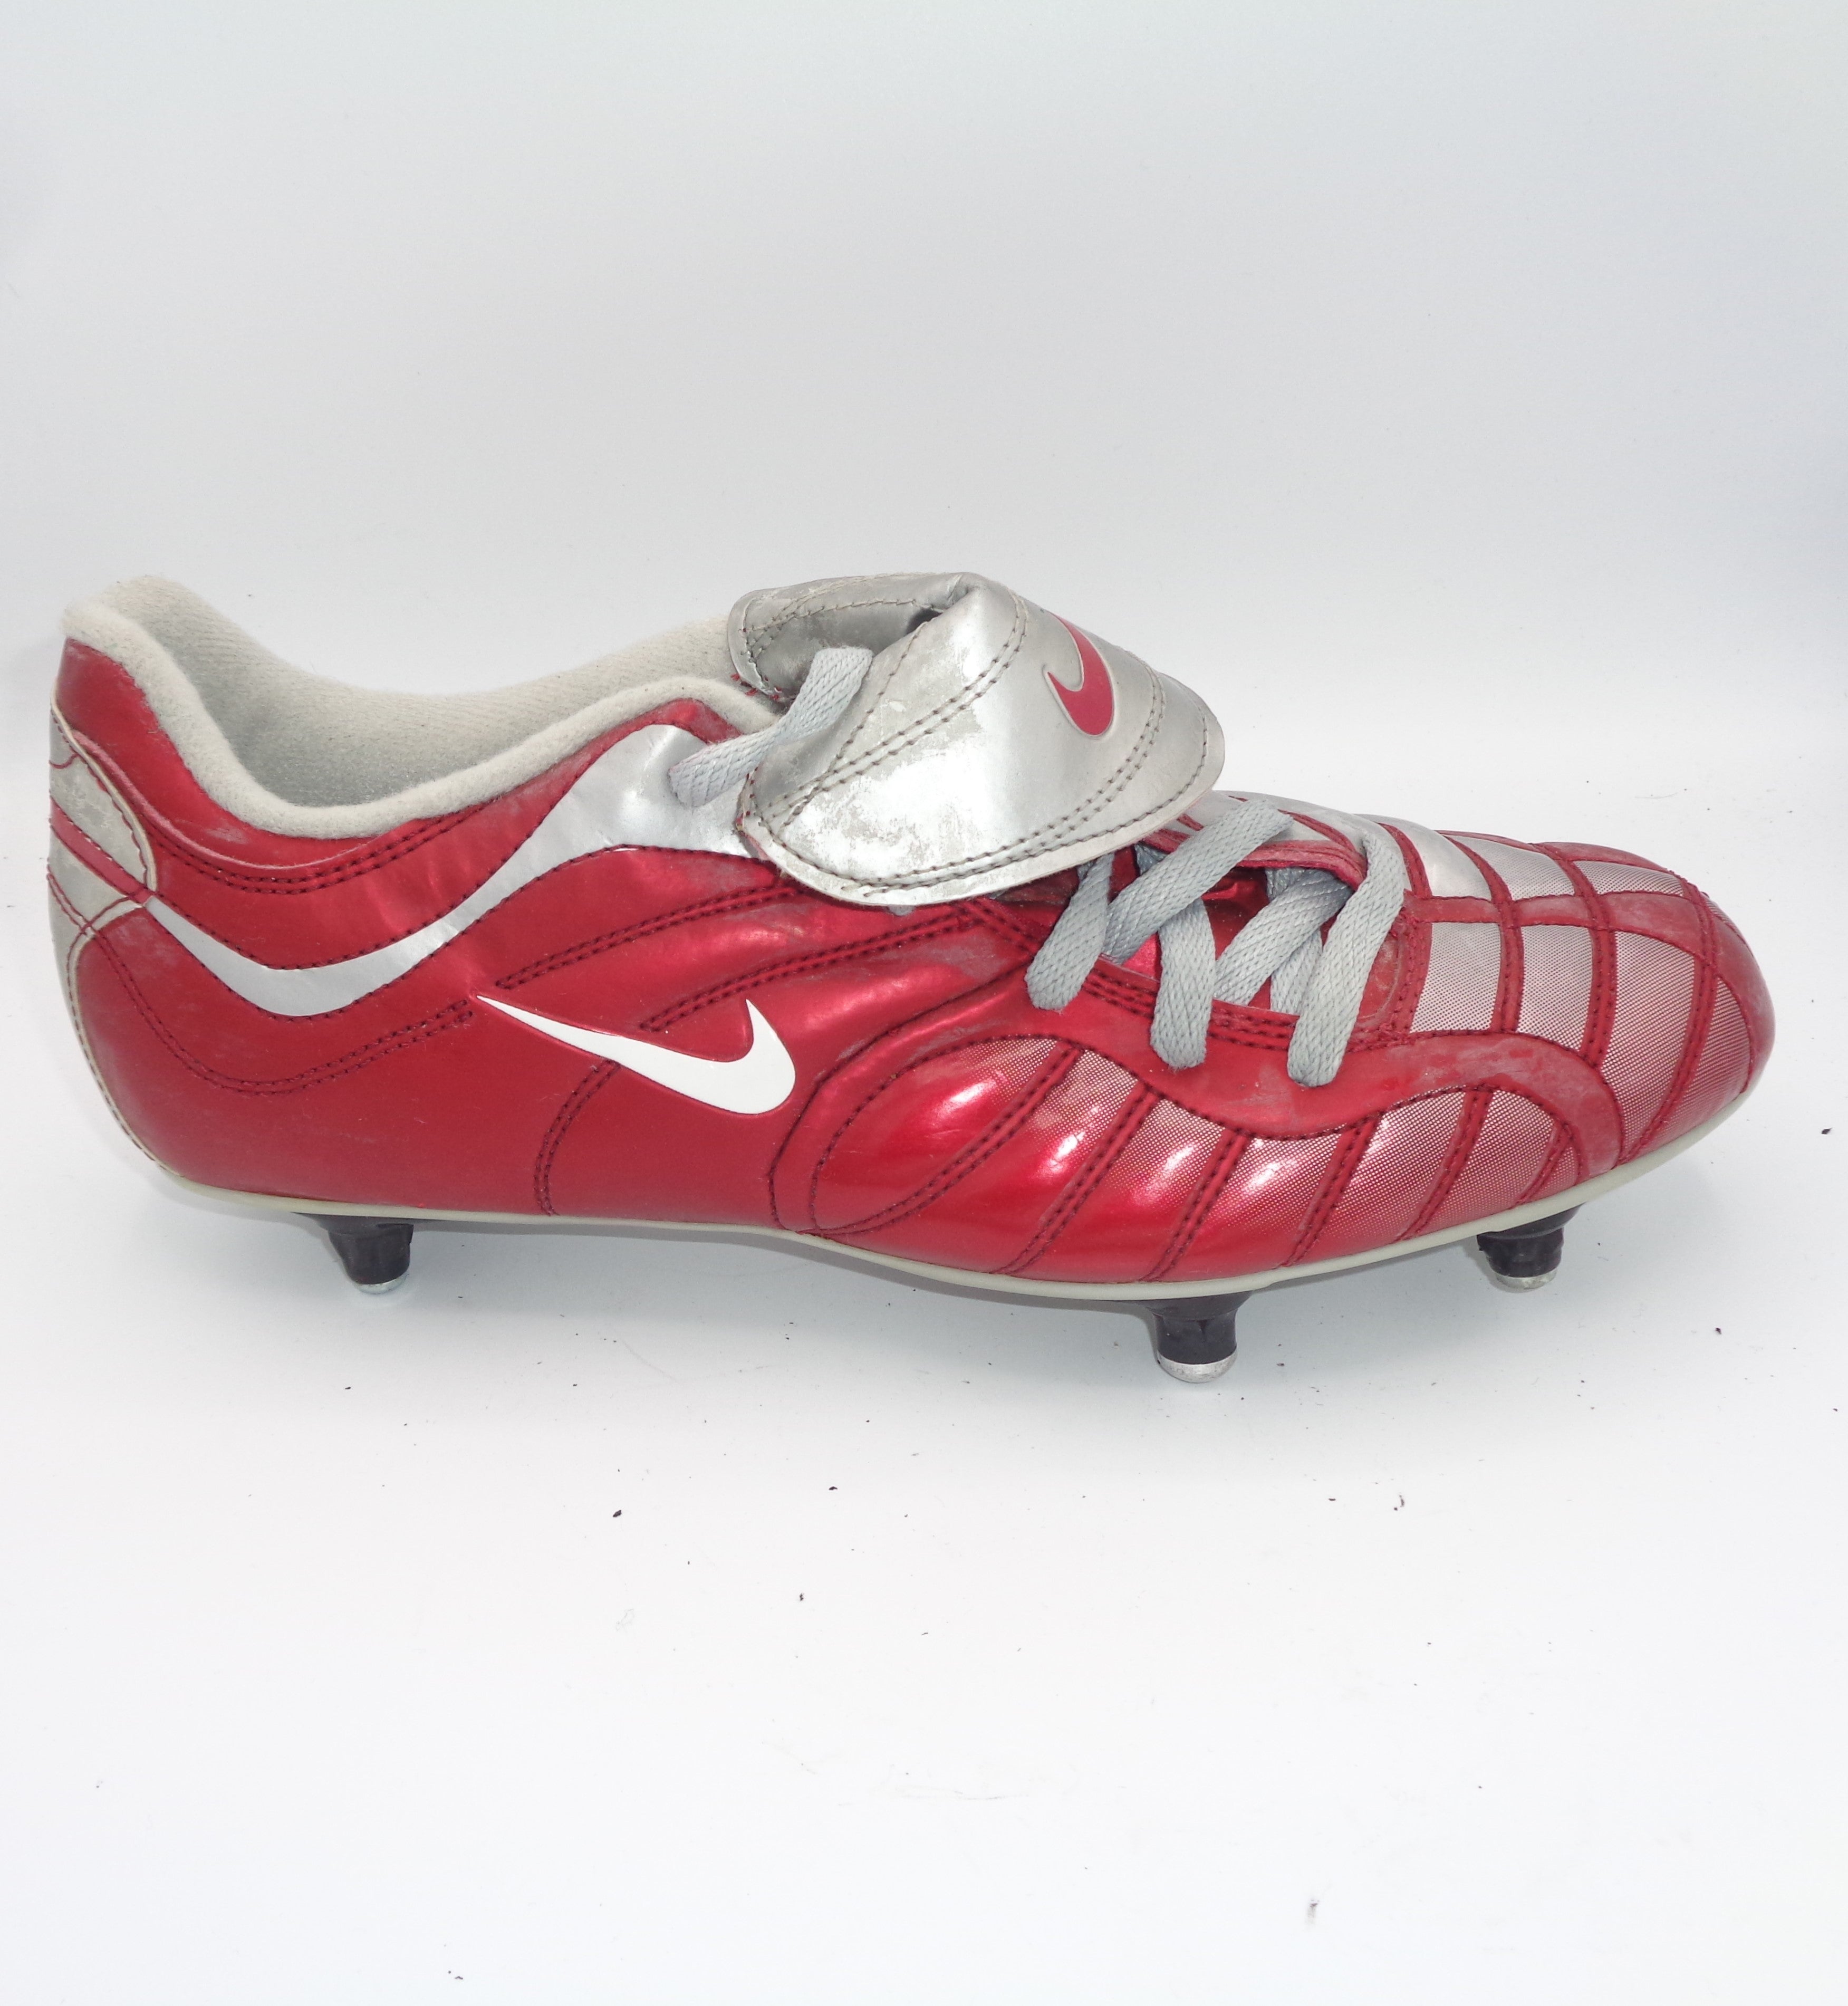 Verstenen Dialoog nicht NIKE TOTAL 90 2001 RED SILVER FOOTBALL BOOTS - NIKE - T90 - SIZE 9 – HA7  CLASSICAL SHIRTS